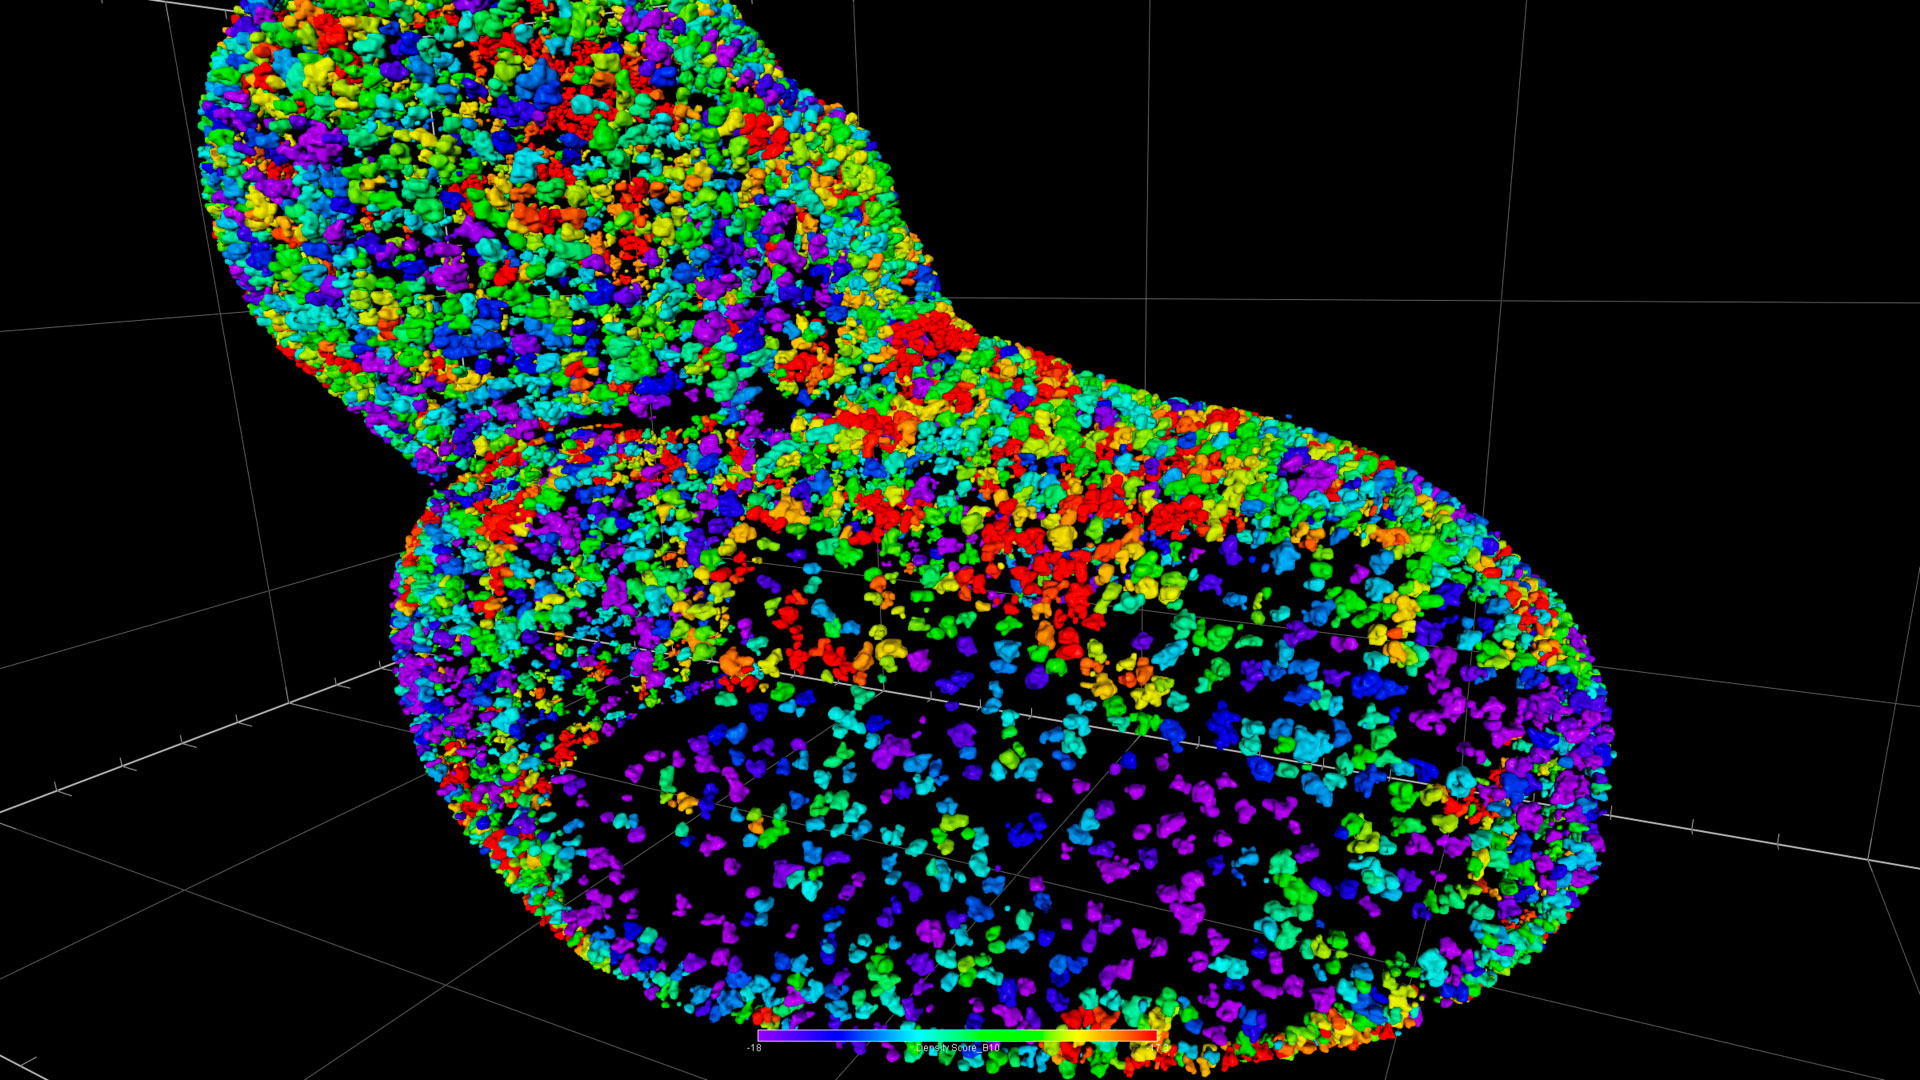 Nuclear pore complexes (NPCs) have variable density distribution across areas of the nucleus